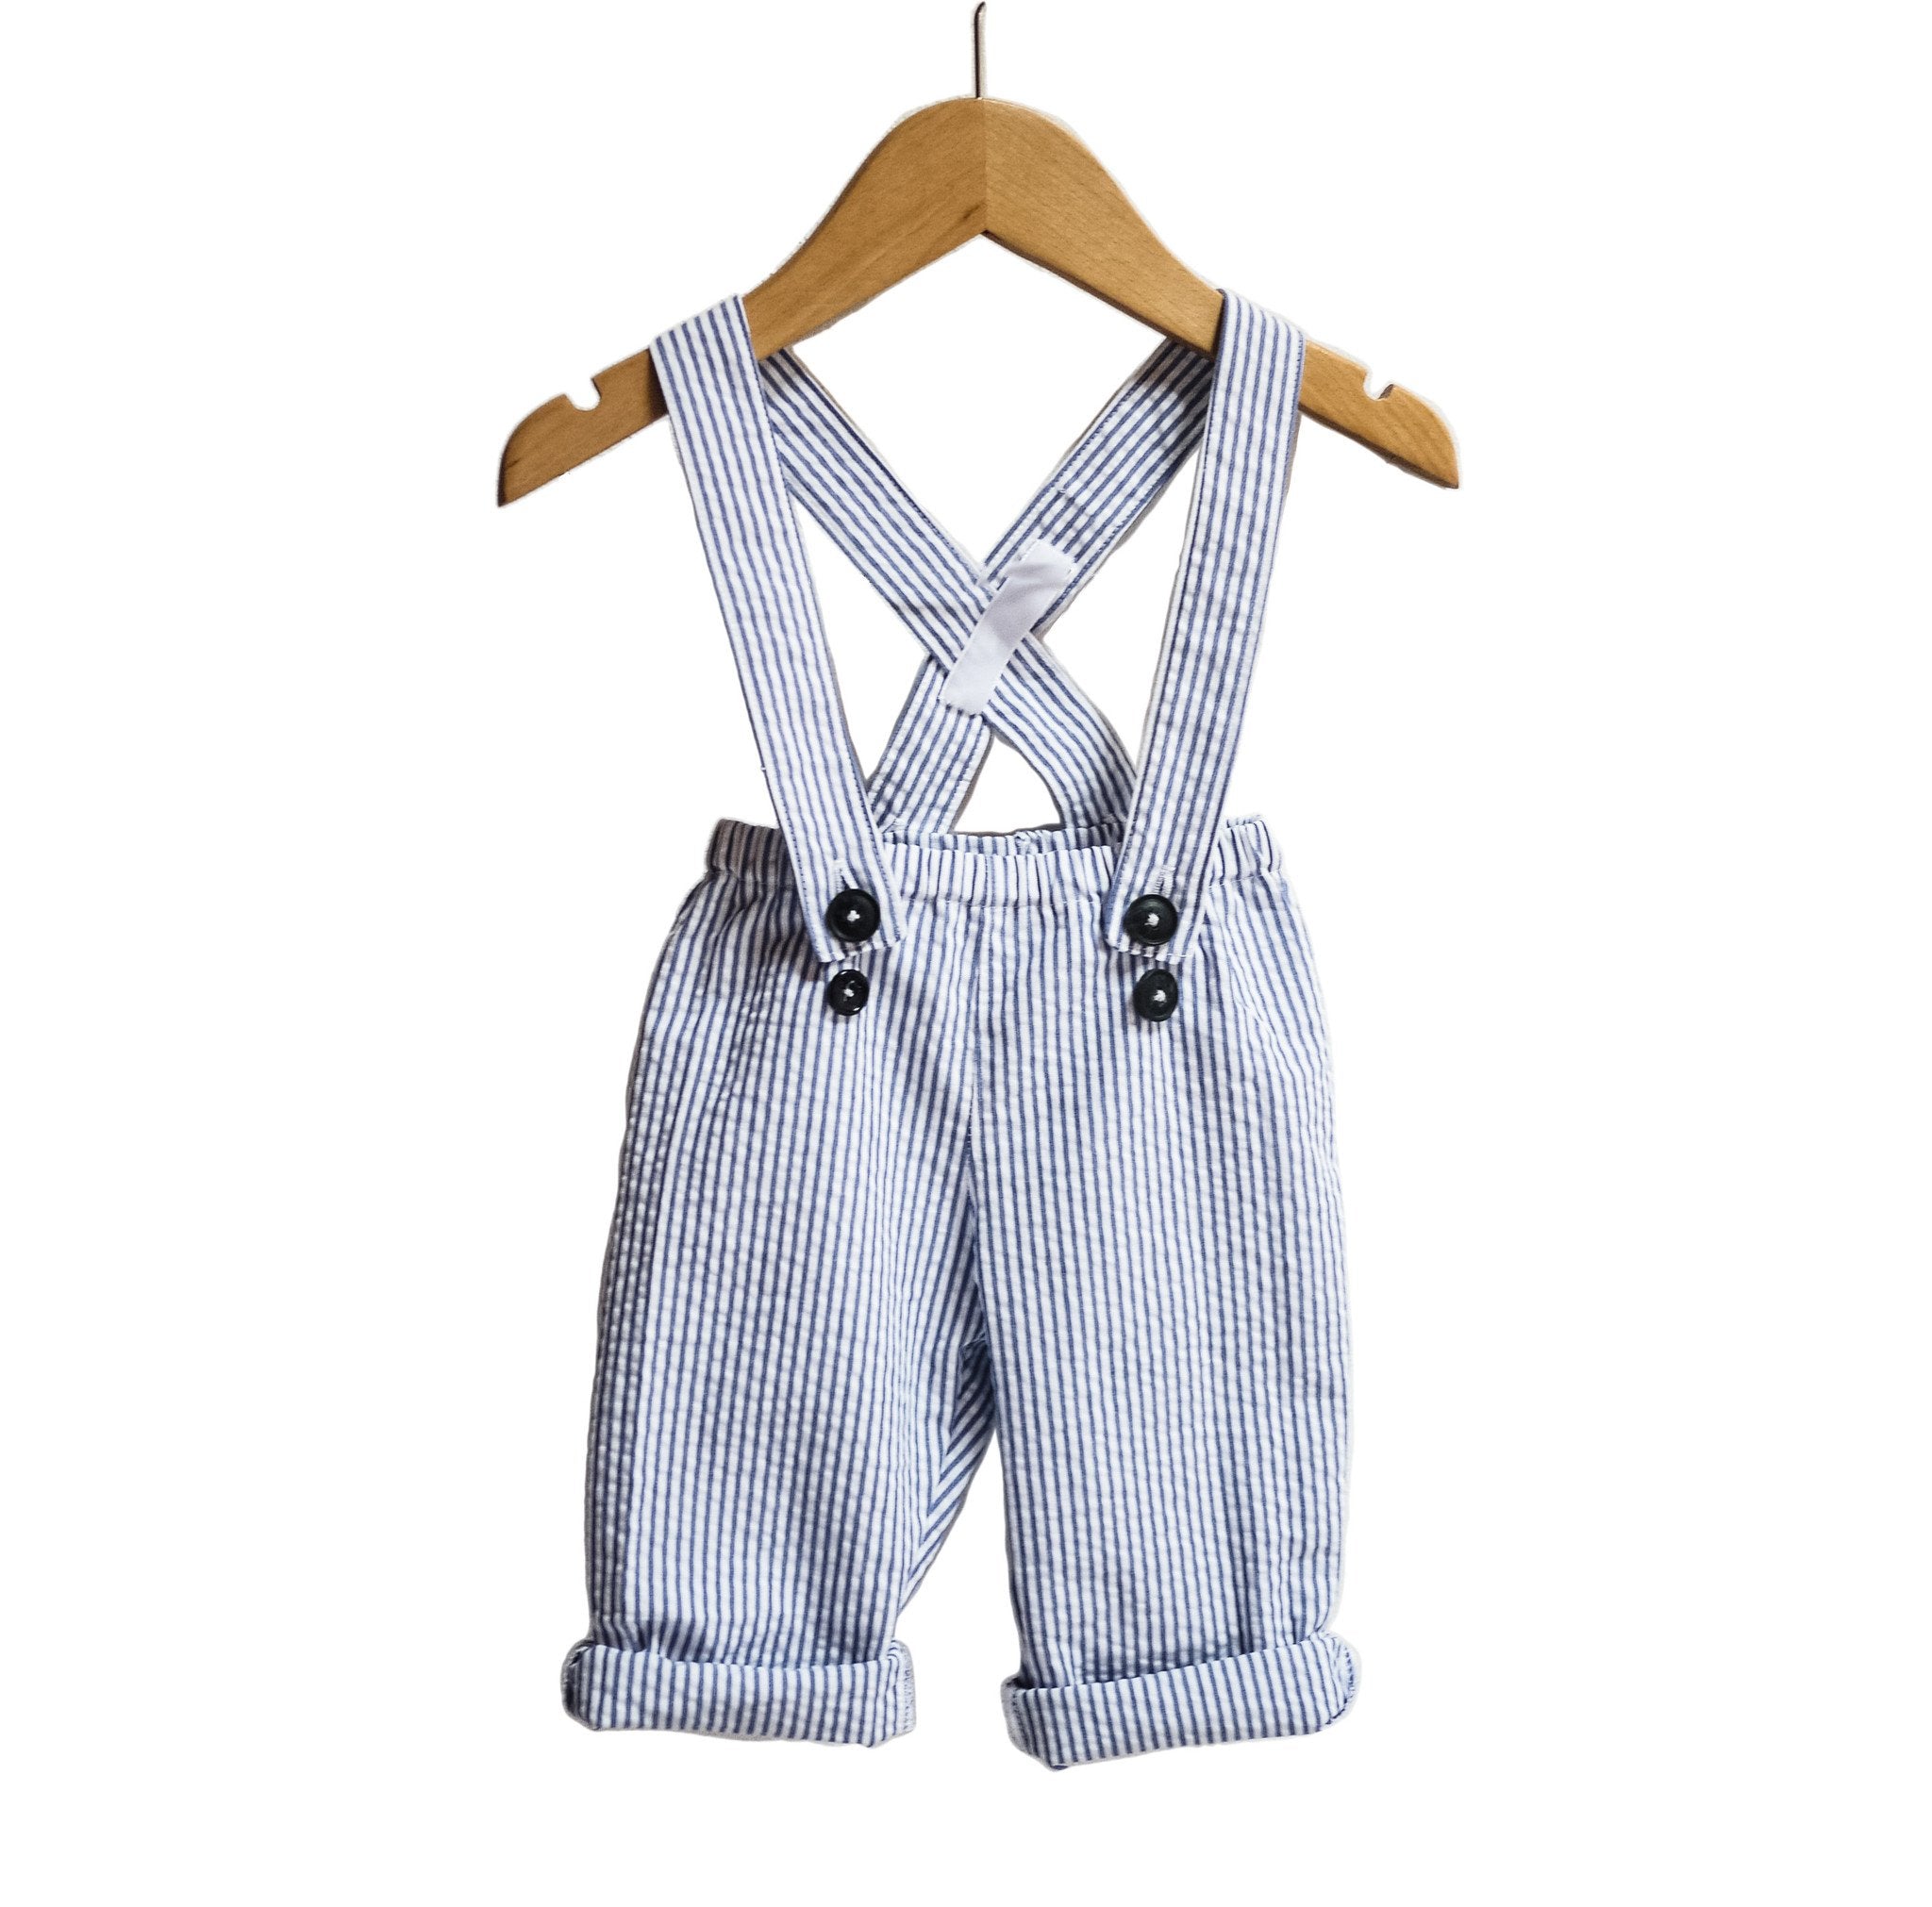 Ikatee - BRIGHTON pants/shorty with suspenders - Baby 6M/4Y- Paper Sewing Pattern